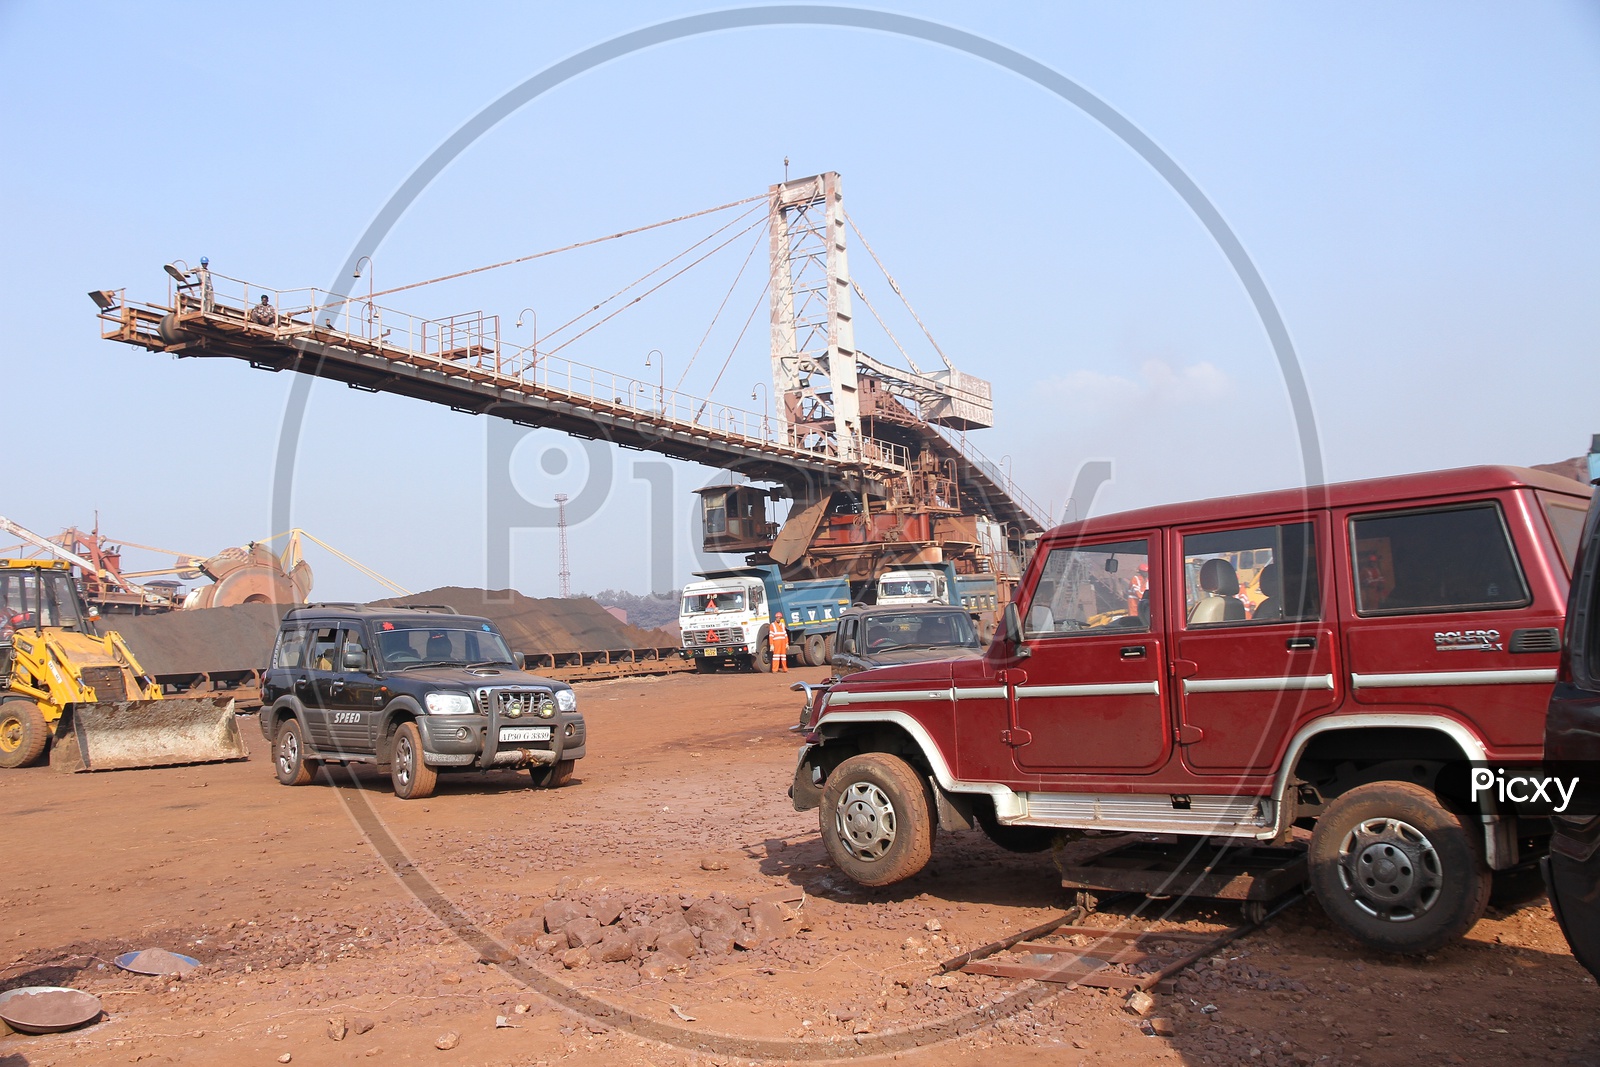 Xuv Cars in a Mining Area